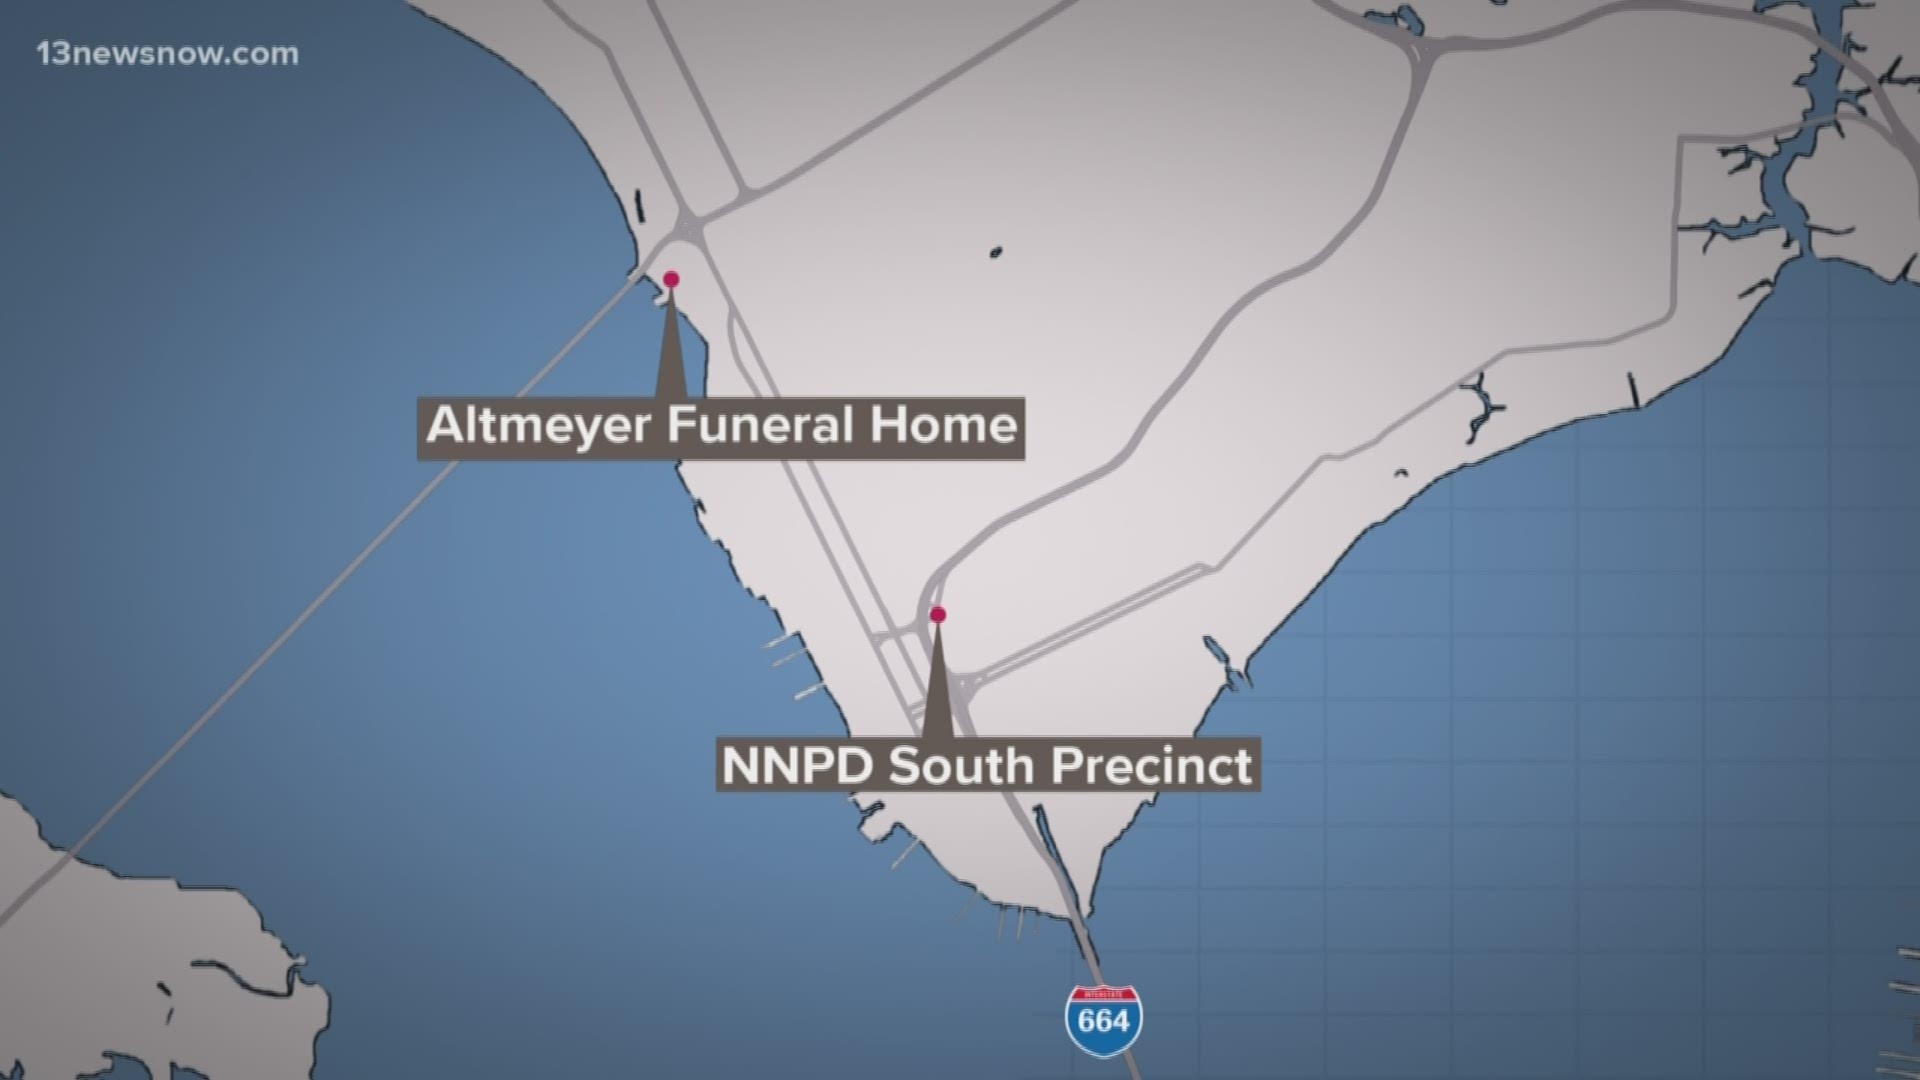 Newport News Police will be holding a procession to transport Officer Katie Thyne's body from the Medical Examiner's Office to a funeral home.